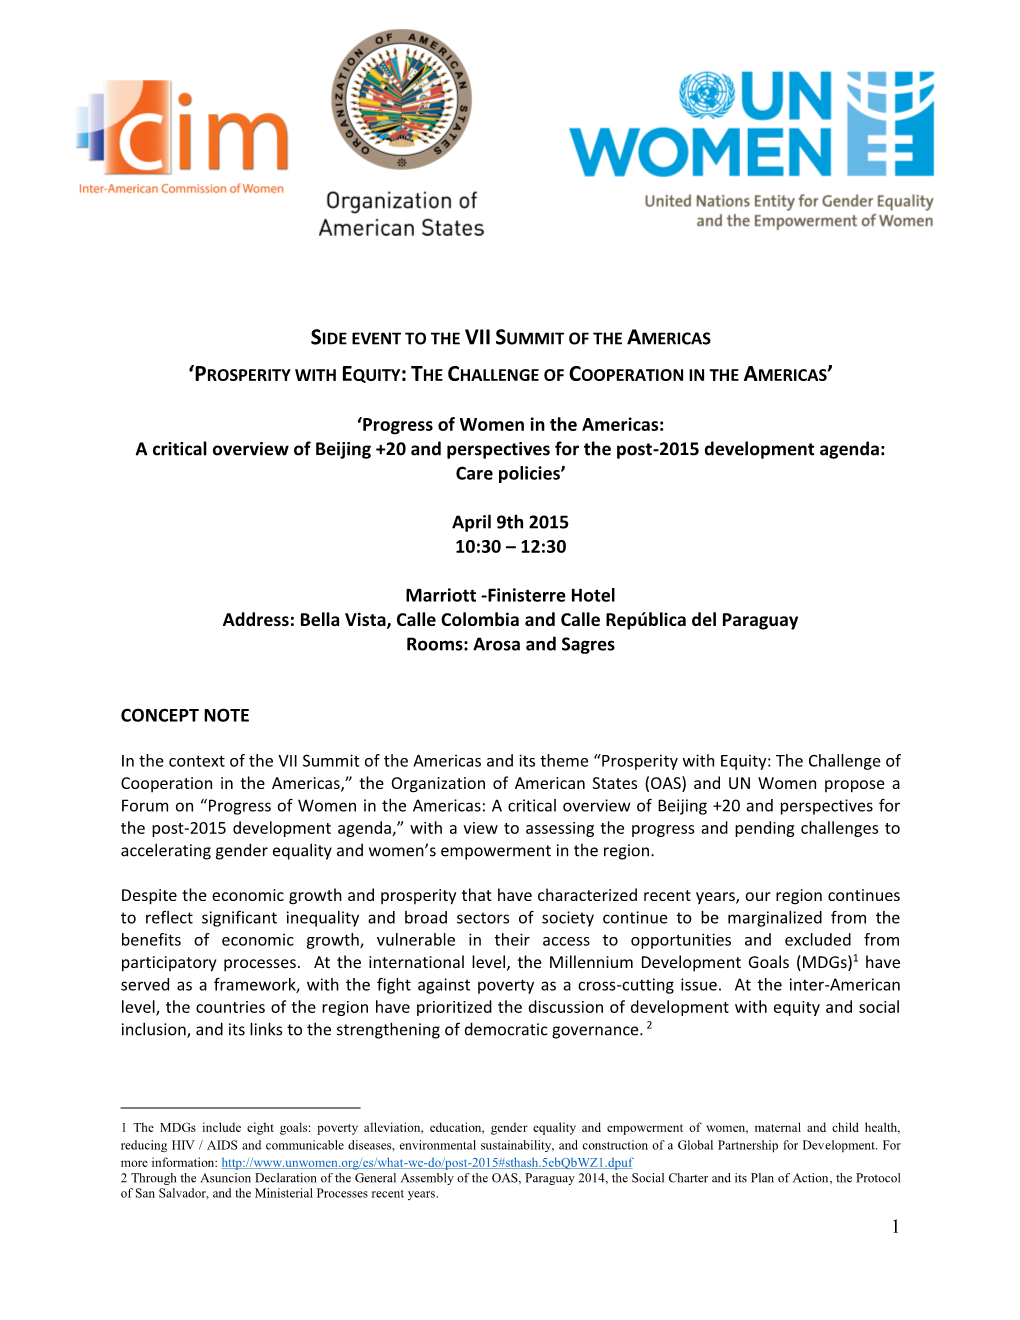 1 'Progress of Women in the Americas: a Critical Overview of Beijing +20 and Perspectives for the Post-2015 Development Agend